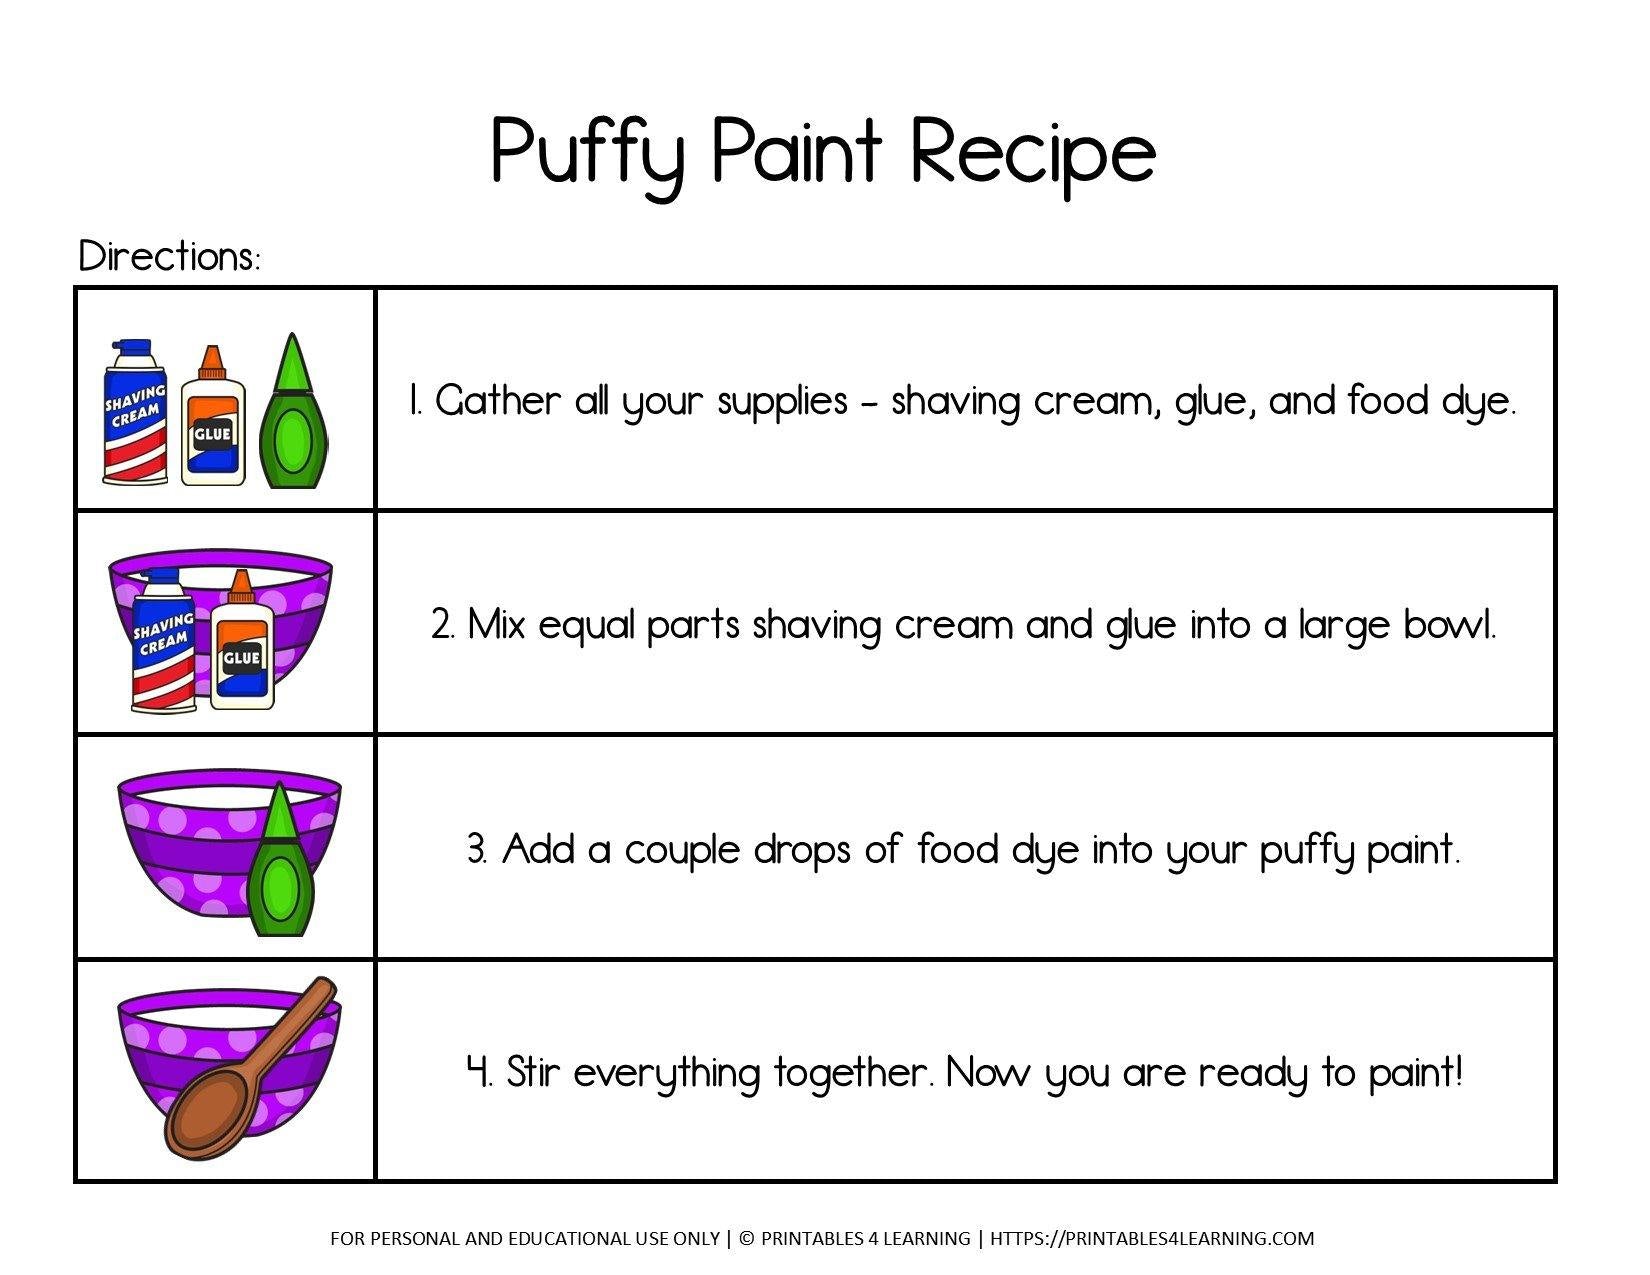 How to Make Puffy Paint - ABCDee Learning